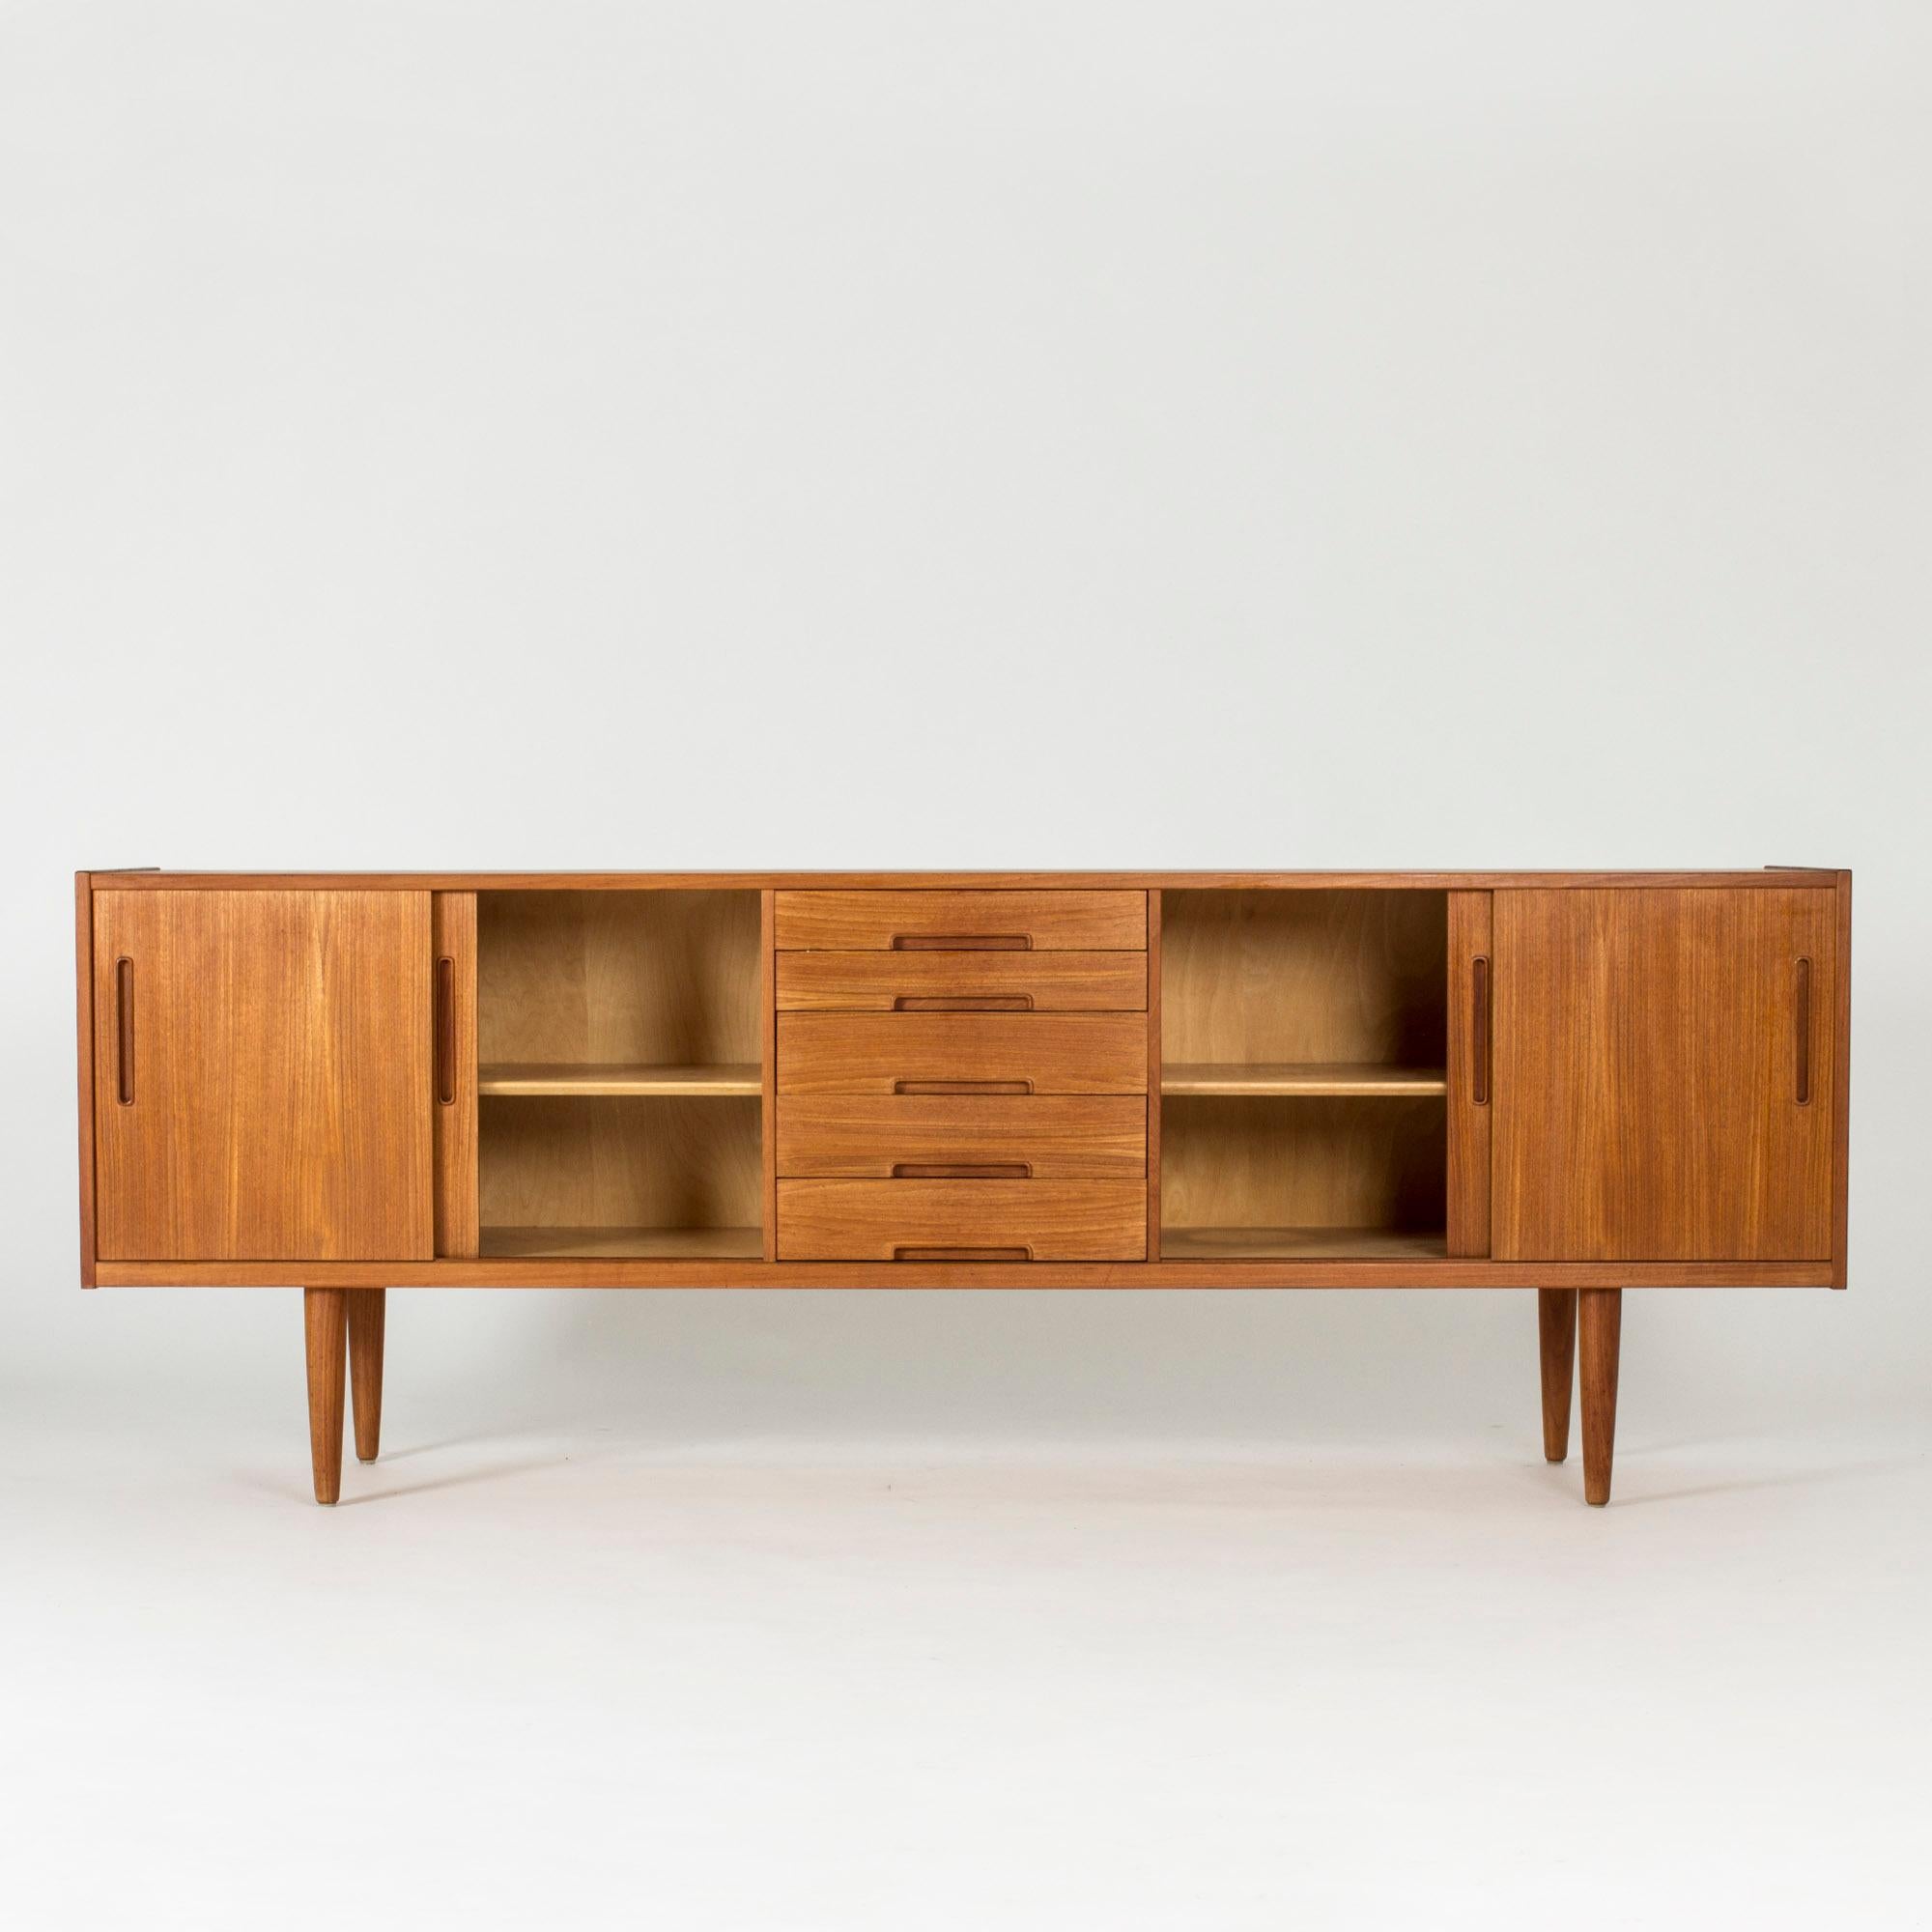 “Gigant” sideboard by Nils Jonsson. Made from teak, with a central chest of drawers and shelves on each side with sliding doors. Cool effect of the direction of the wood grain which is vertical on the doors and horizontal on the drawers.